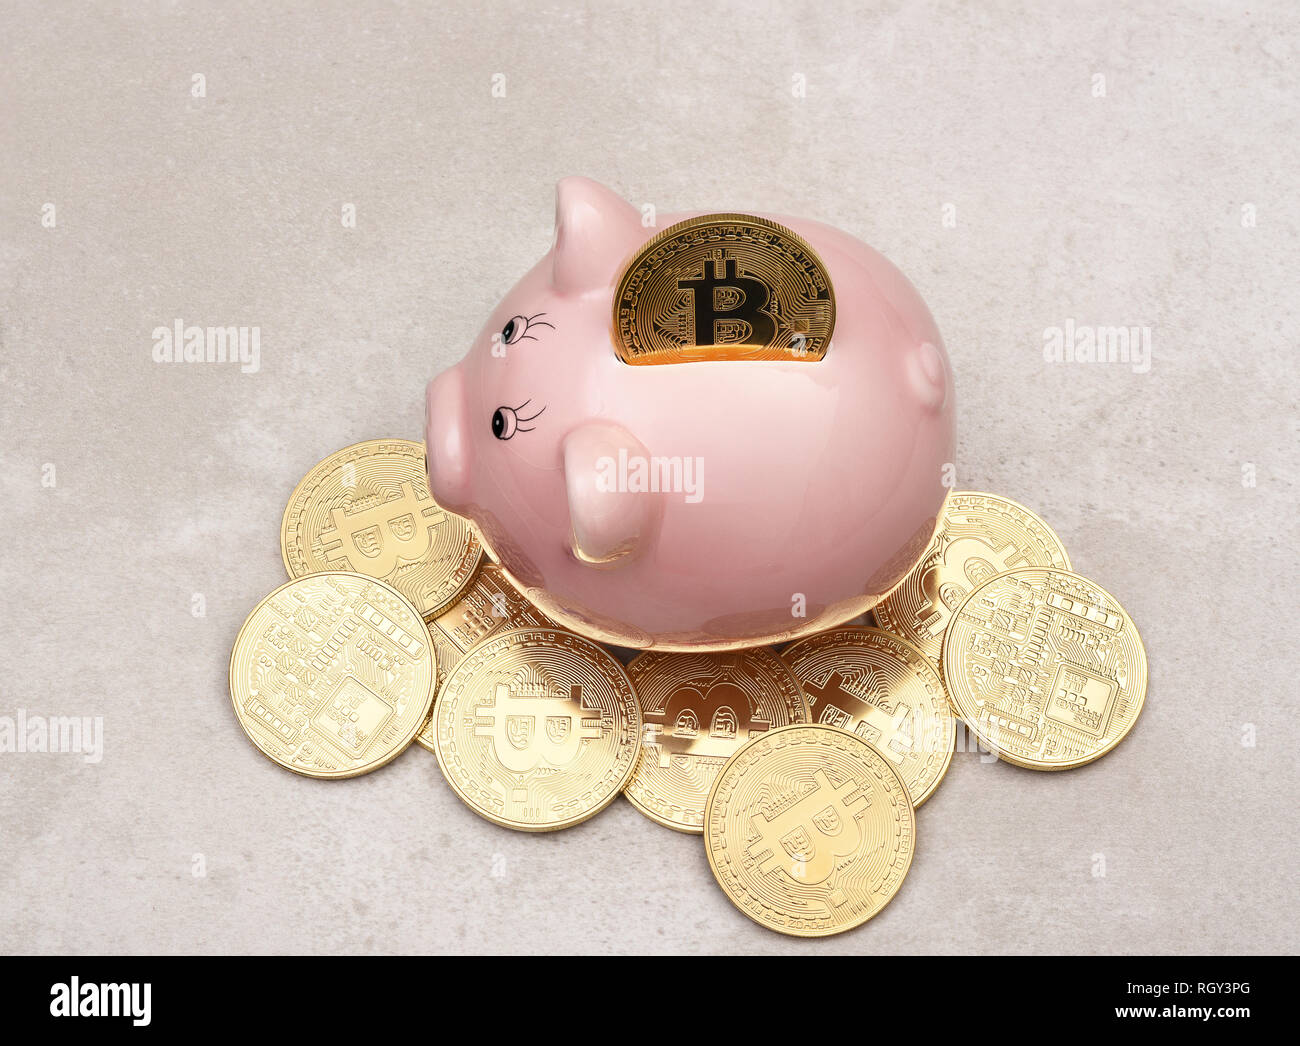 Savings Concept: A Bit Coin in the slot of a piggy bank with more coins on the table. Stock Photo